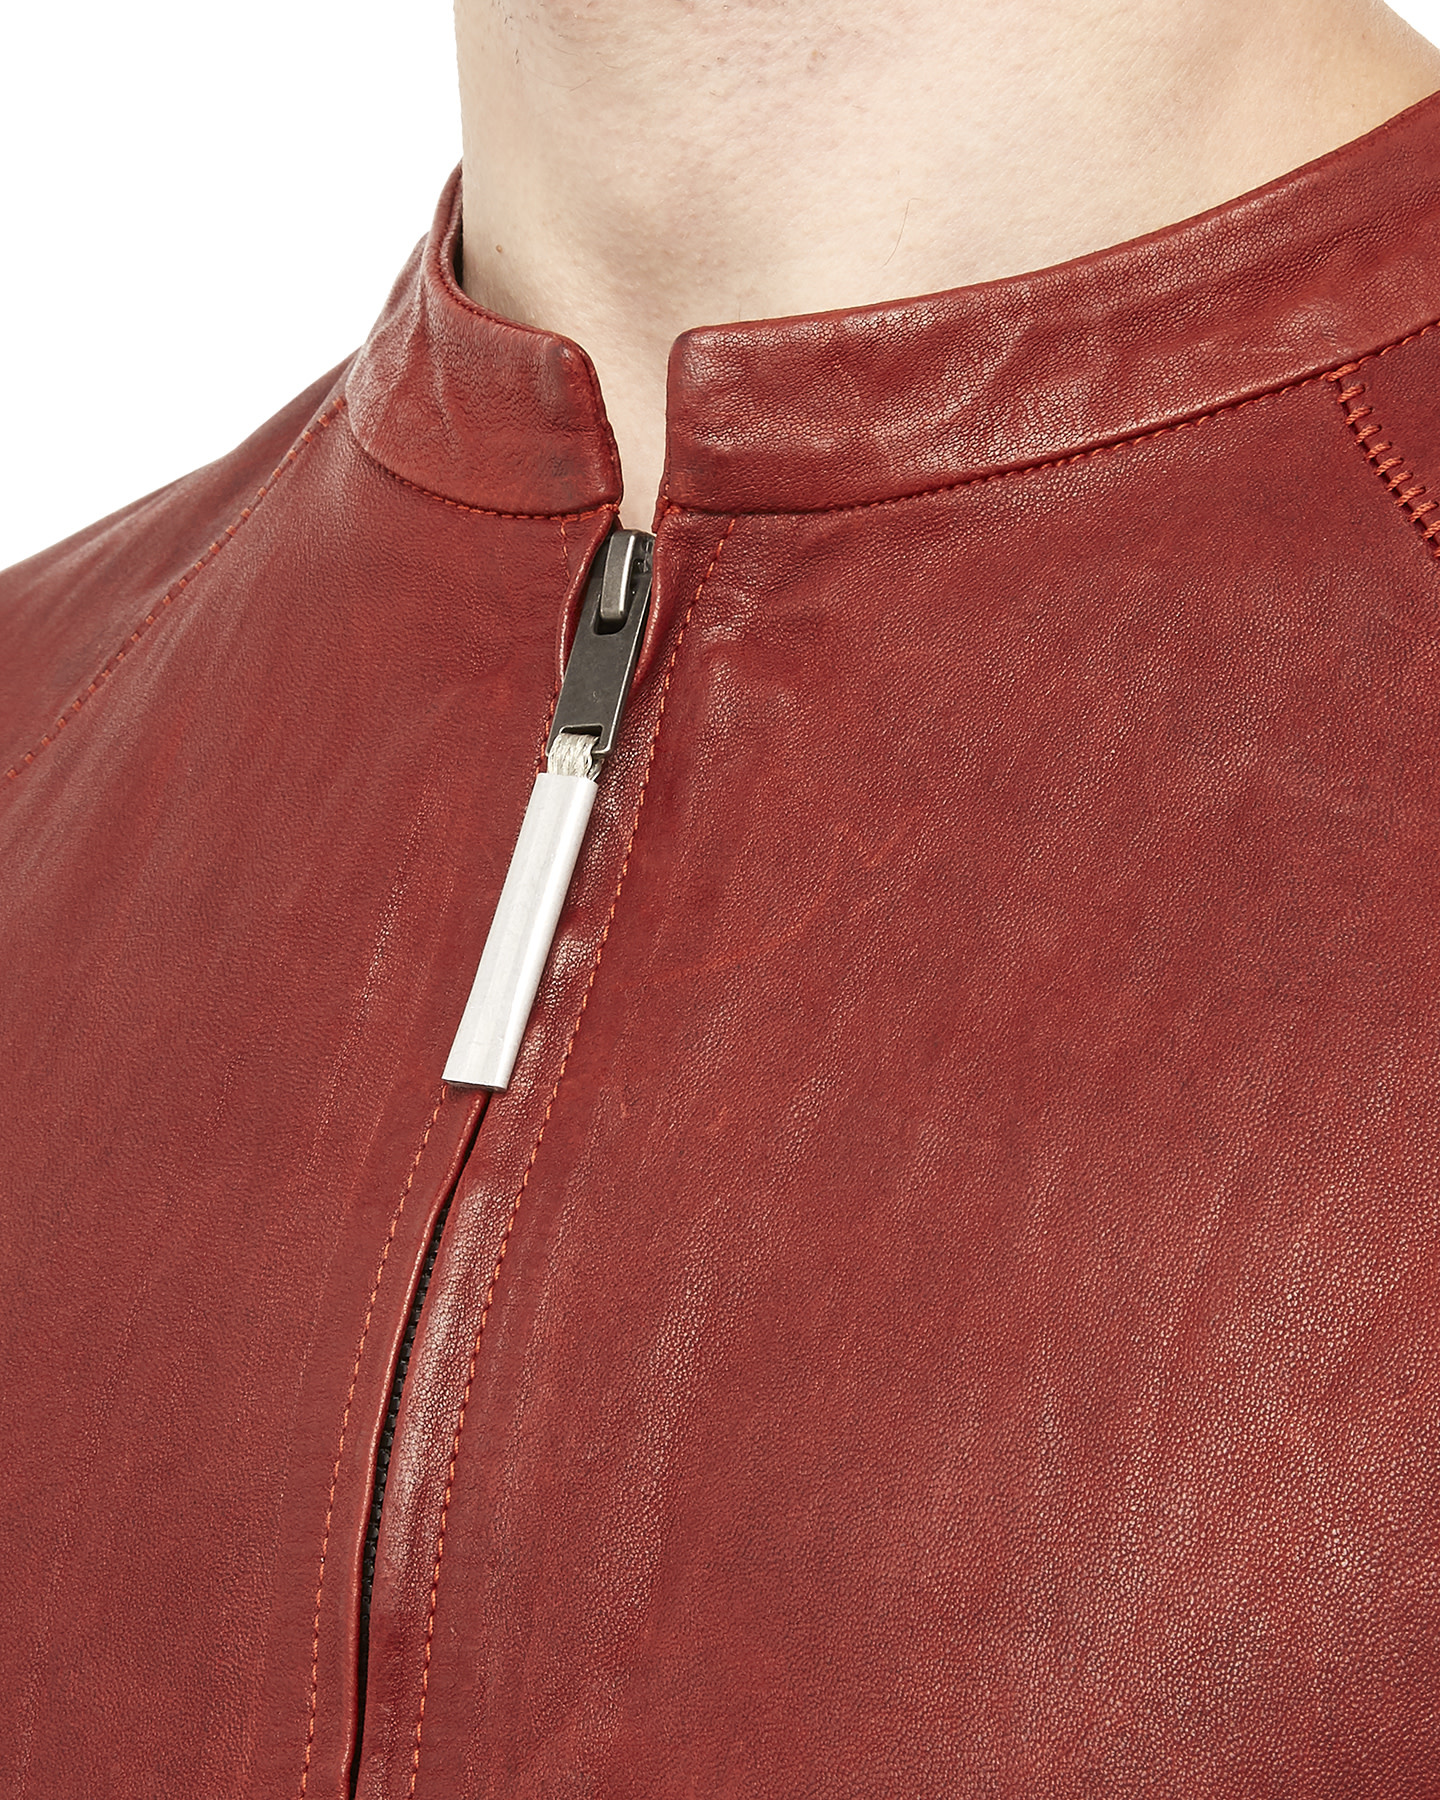 By Untitled Leather - Shop - Oxblood NYC Isaac Sellam Jacket Stretch Arpenteur